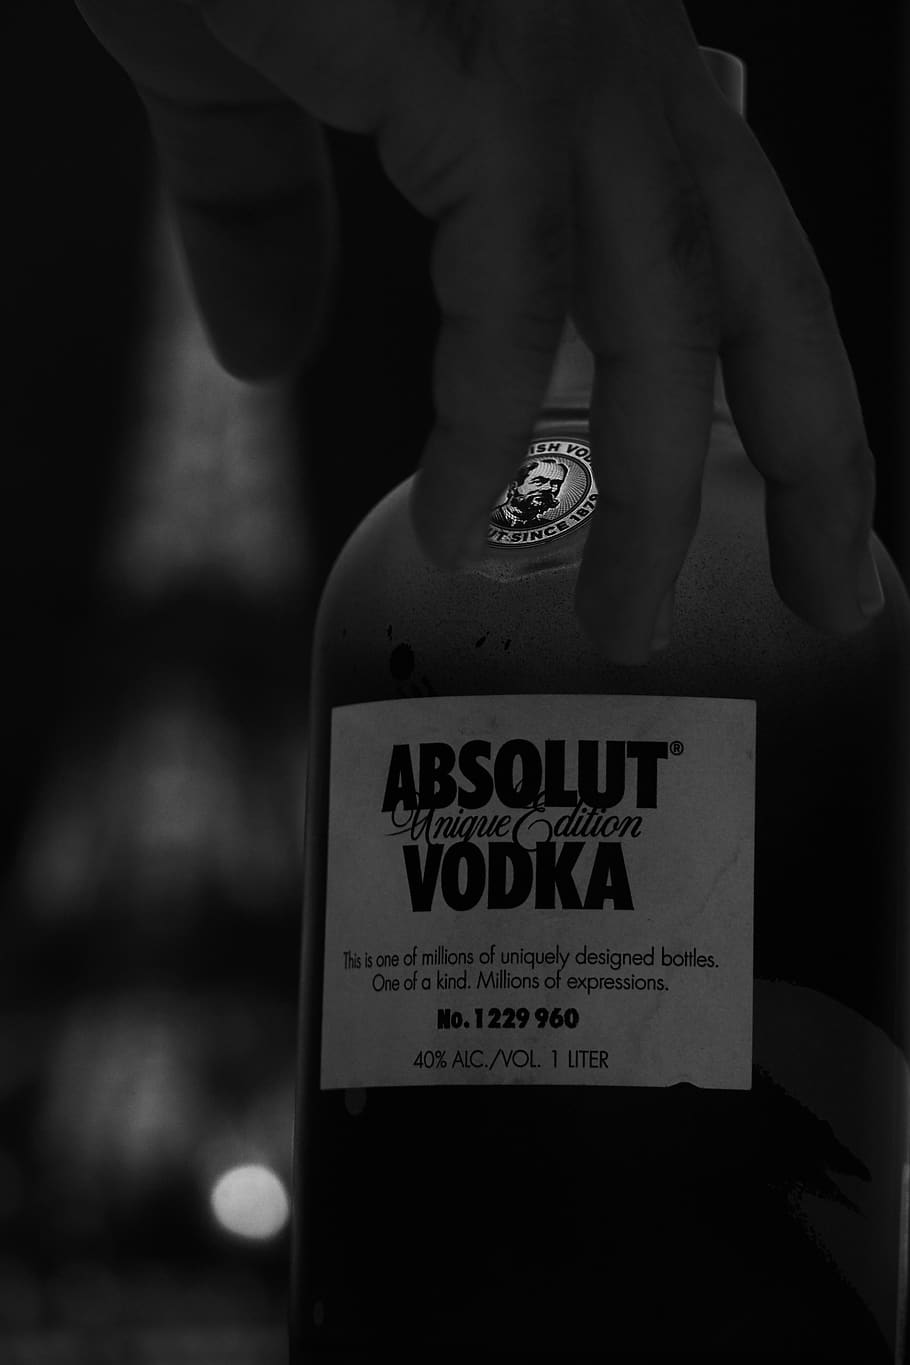 finger, person, human, alcohol, bottle, glass, black and white